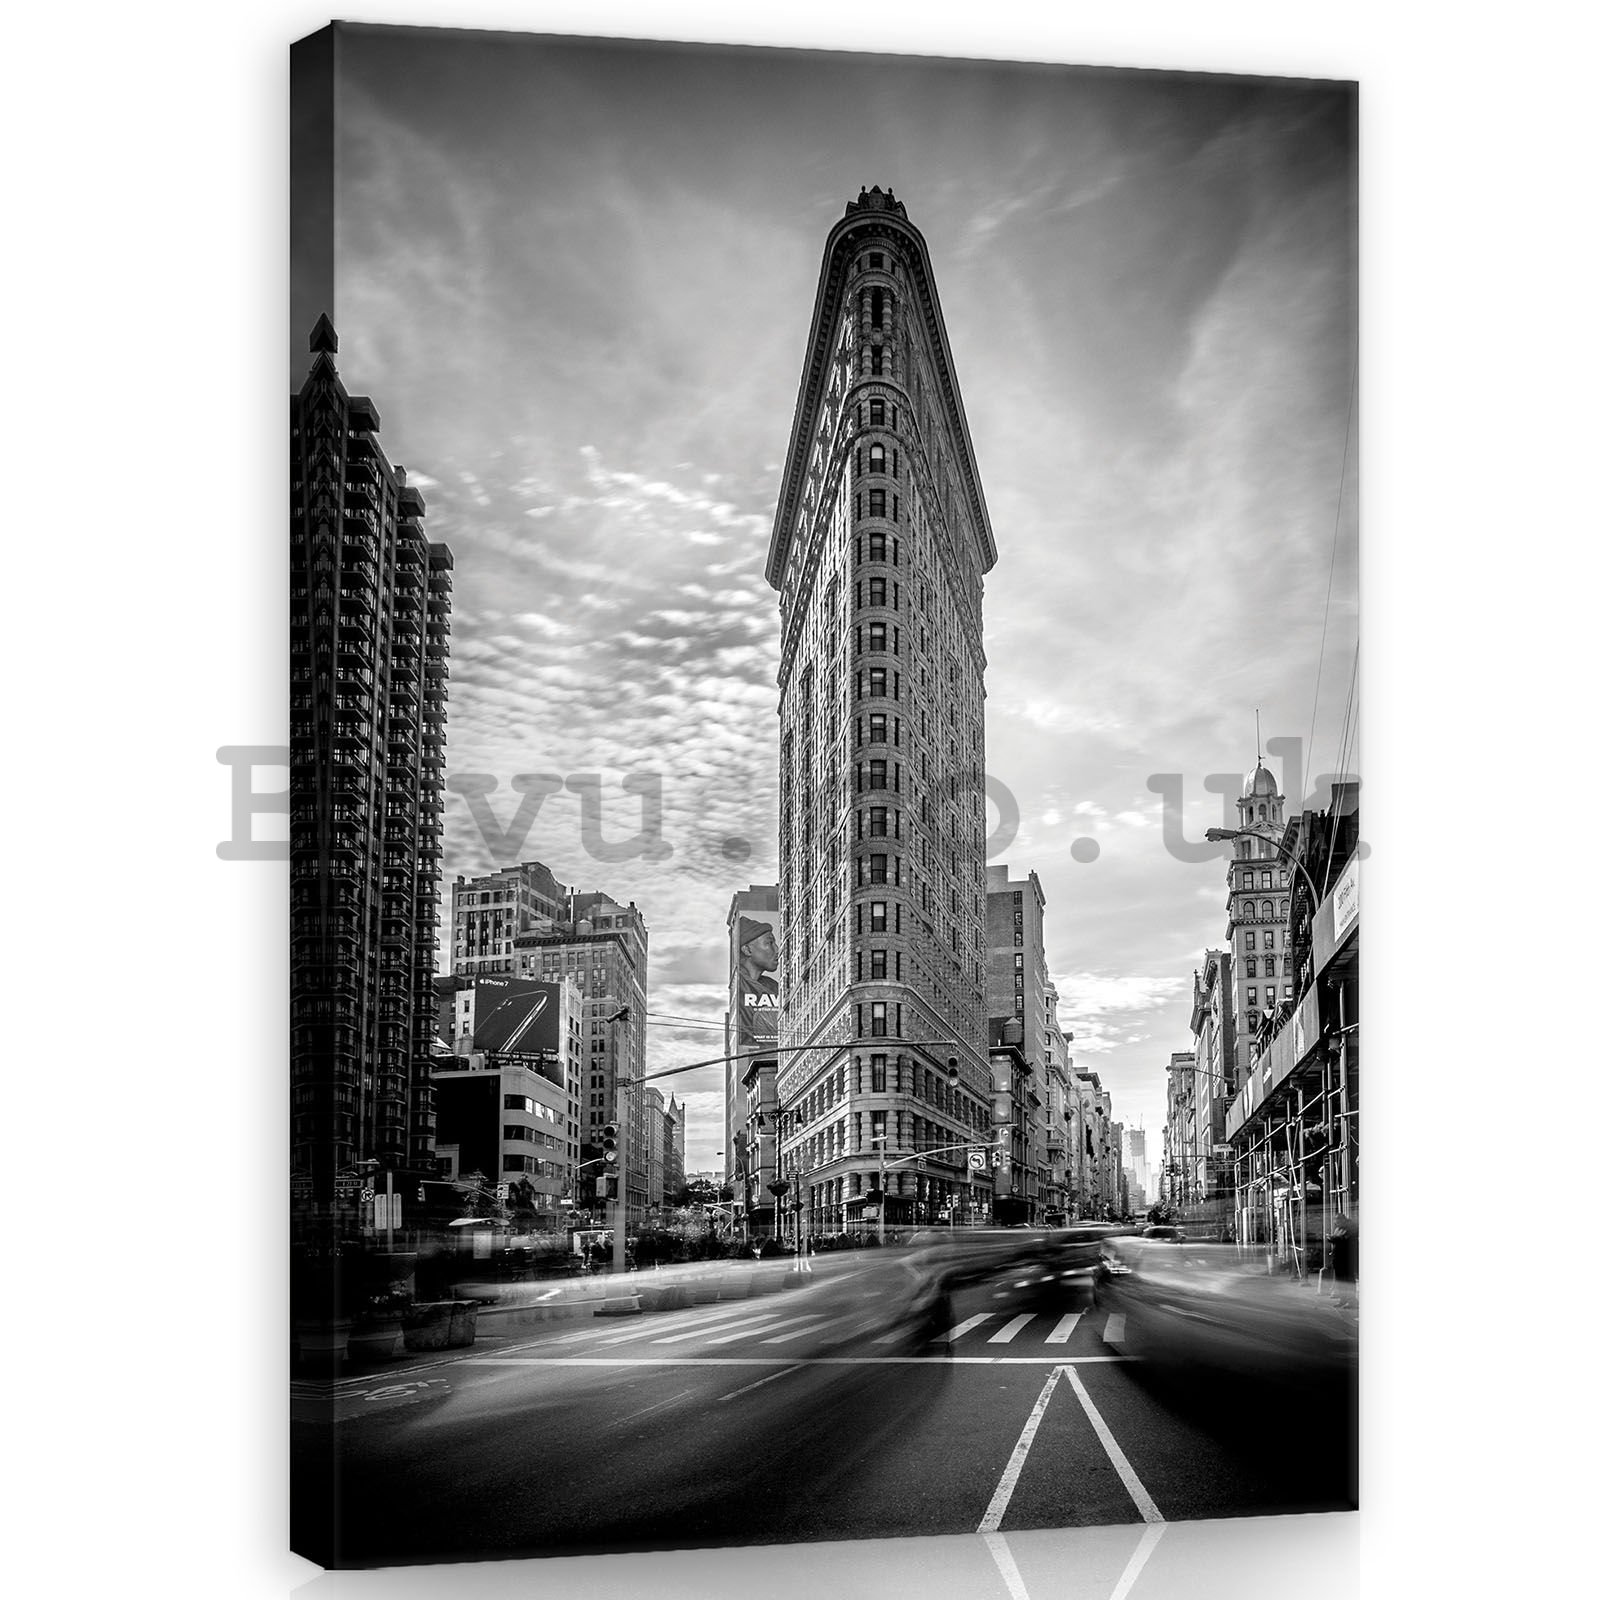 Painting on canvas: Flatiron Building (black and white) - 100x75 cm